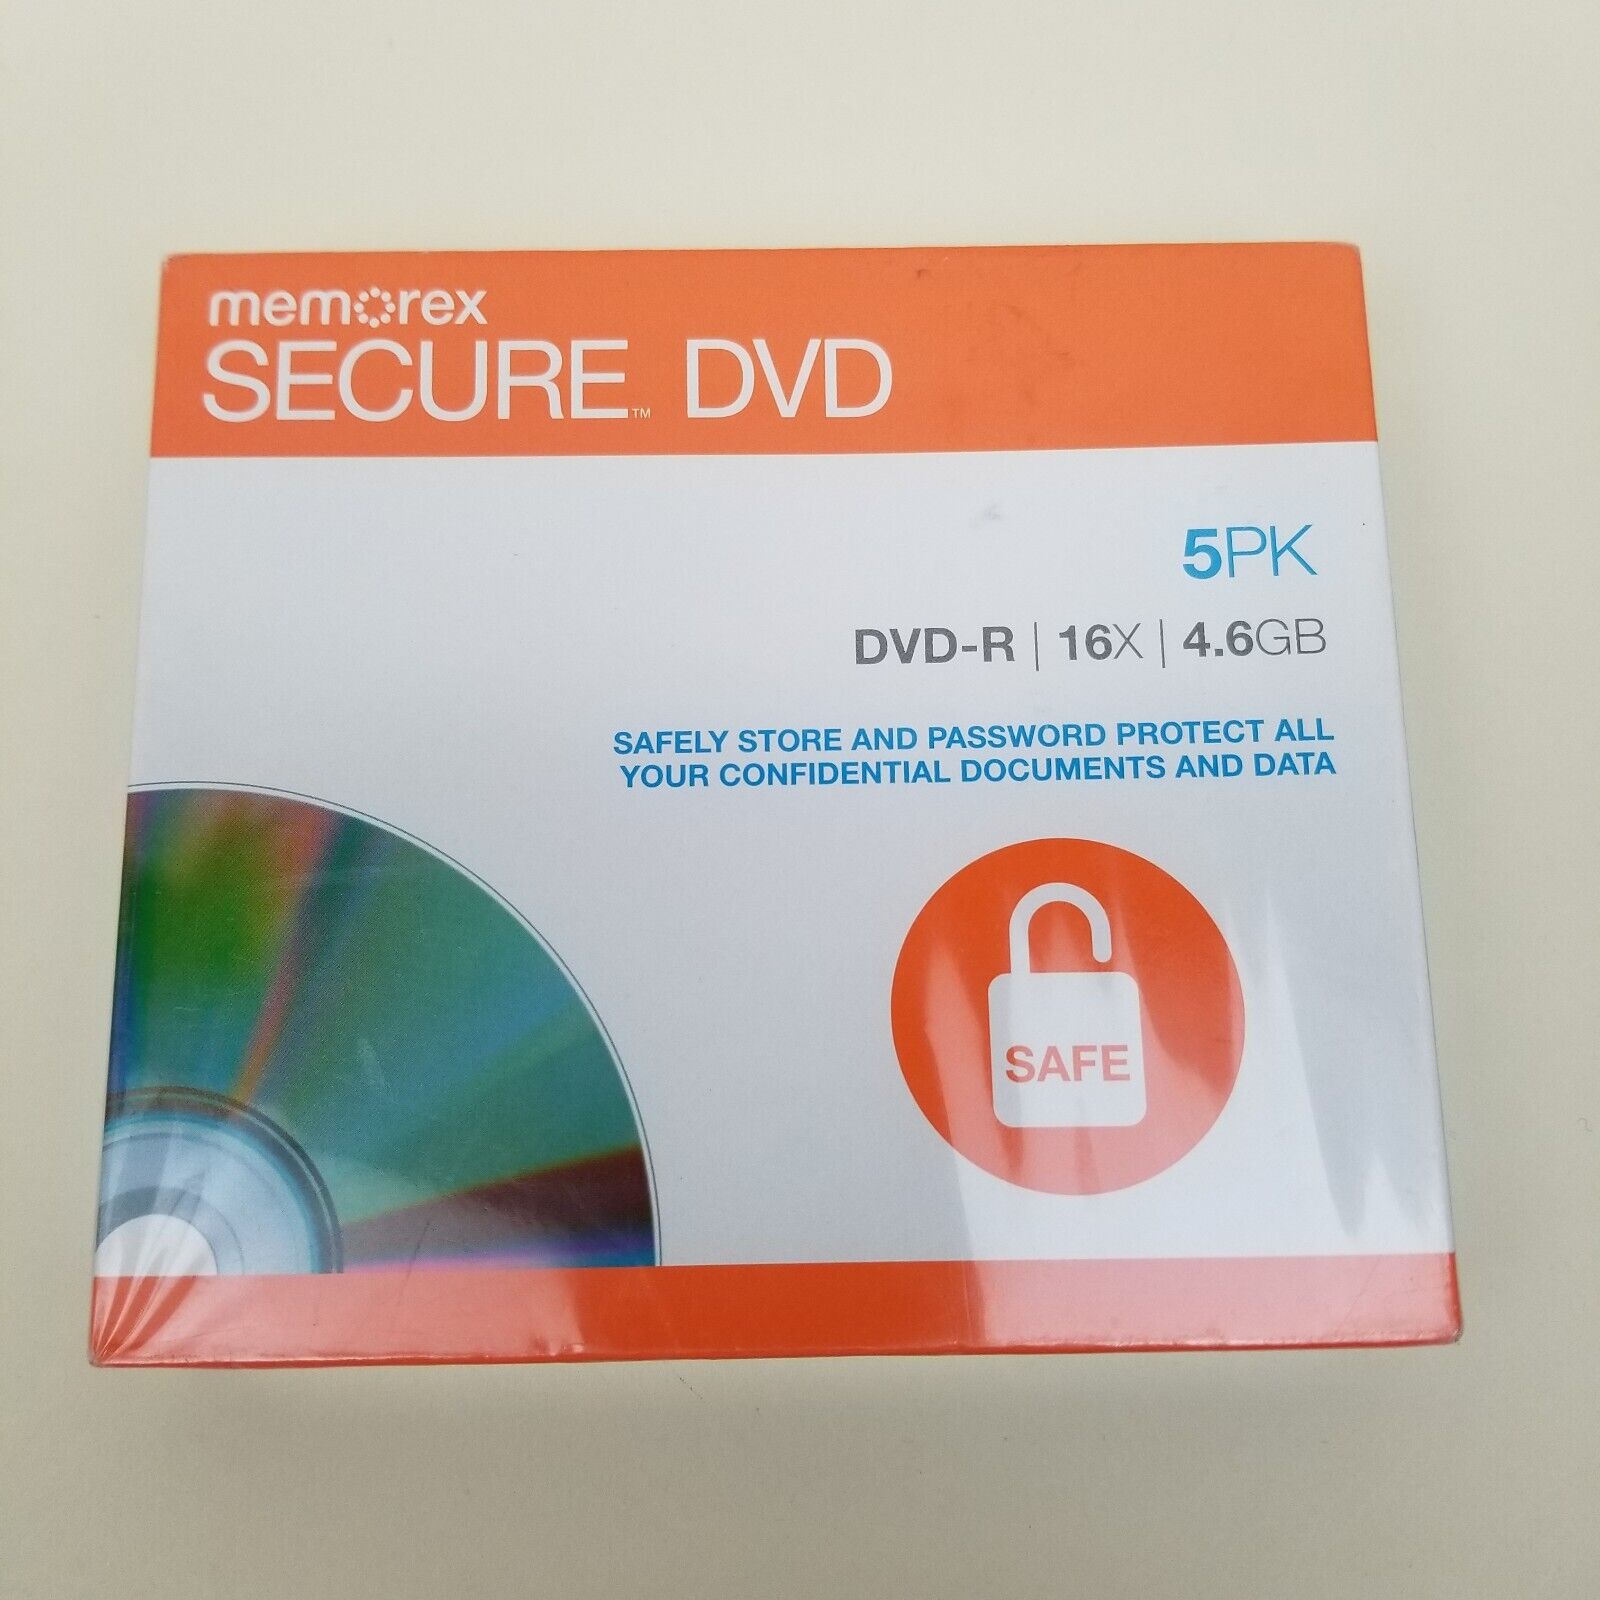 5 Pack of Memorex Secure DVD-R Password Protected Encryption 4.6GB AES 256 Bit